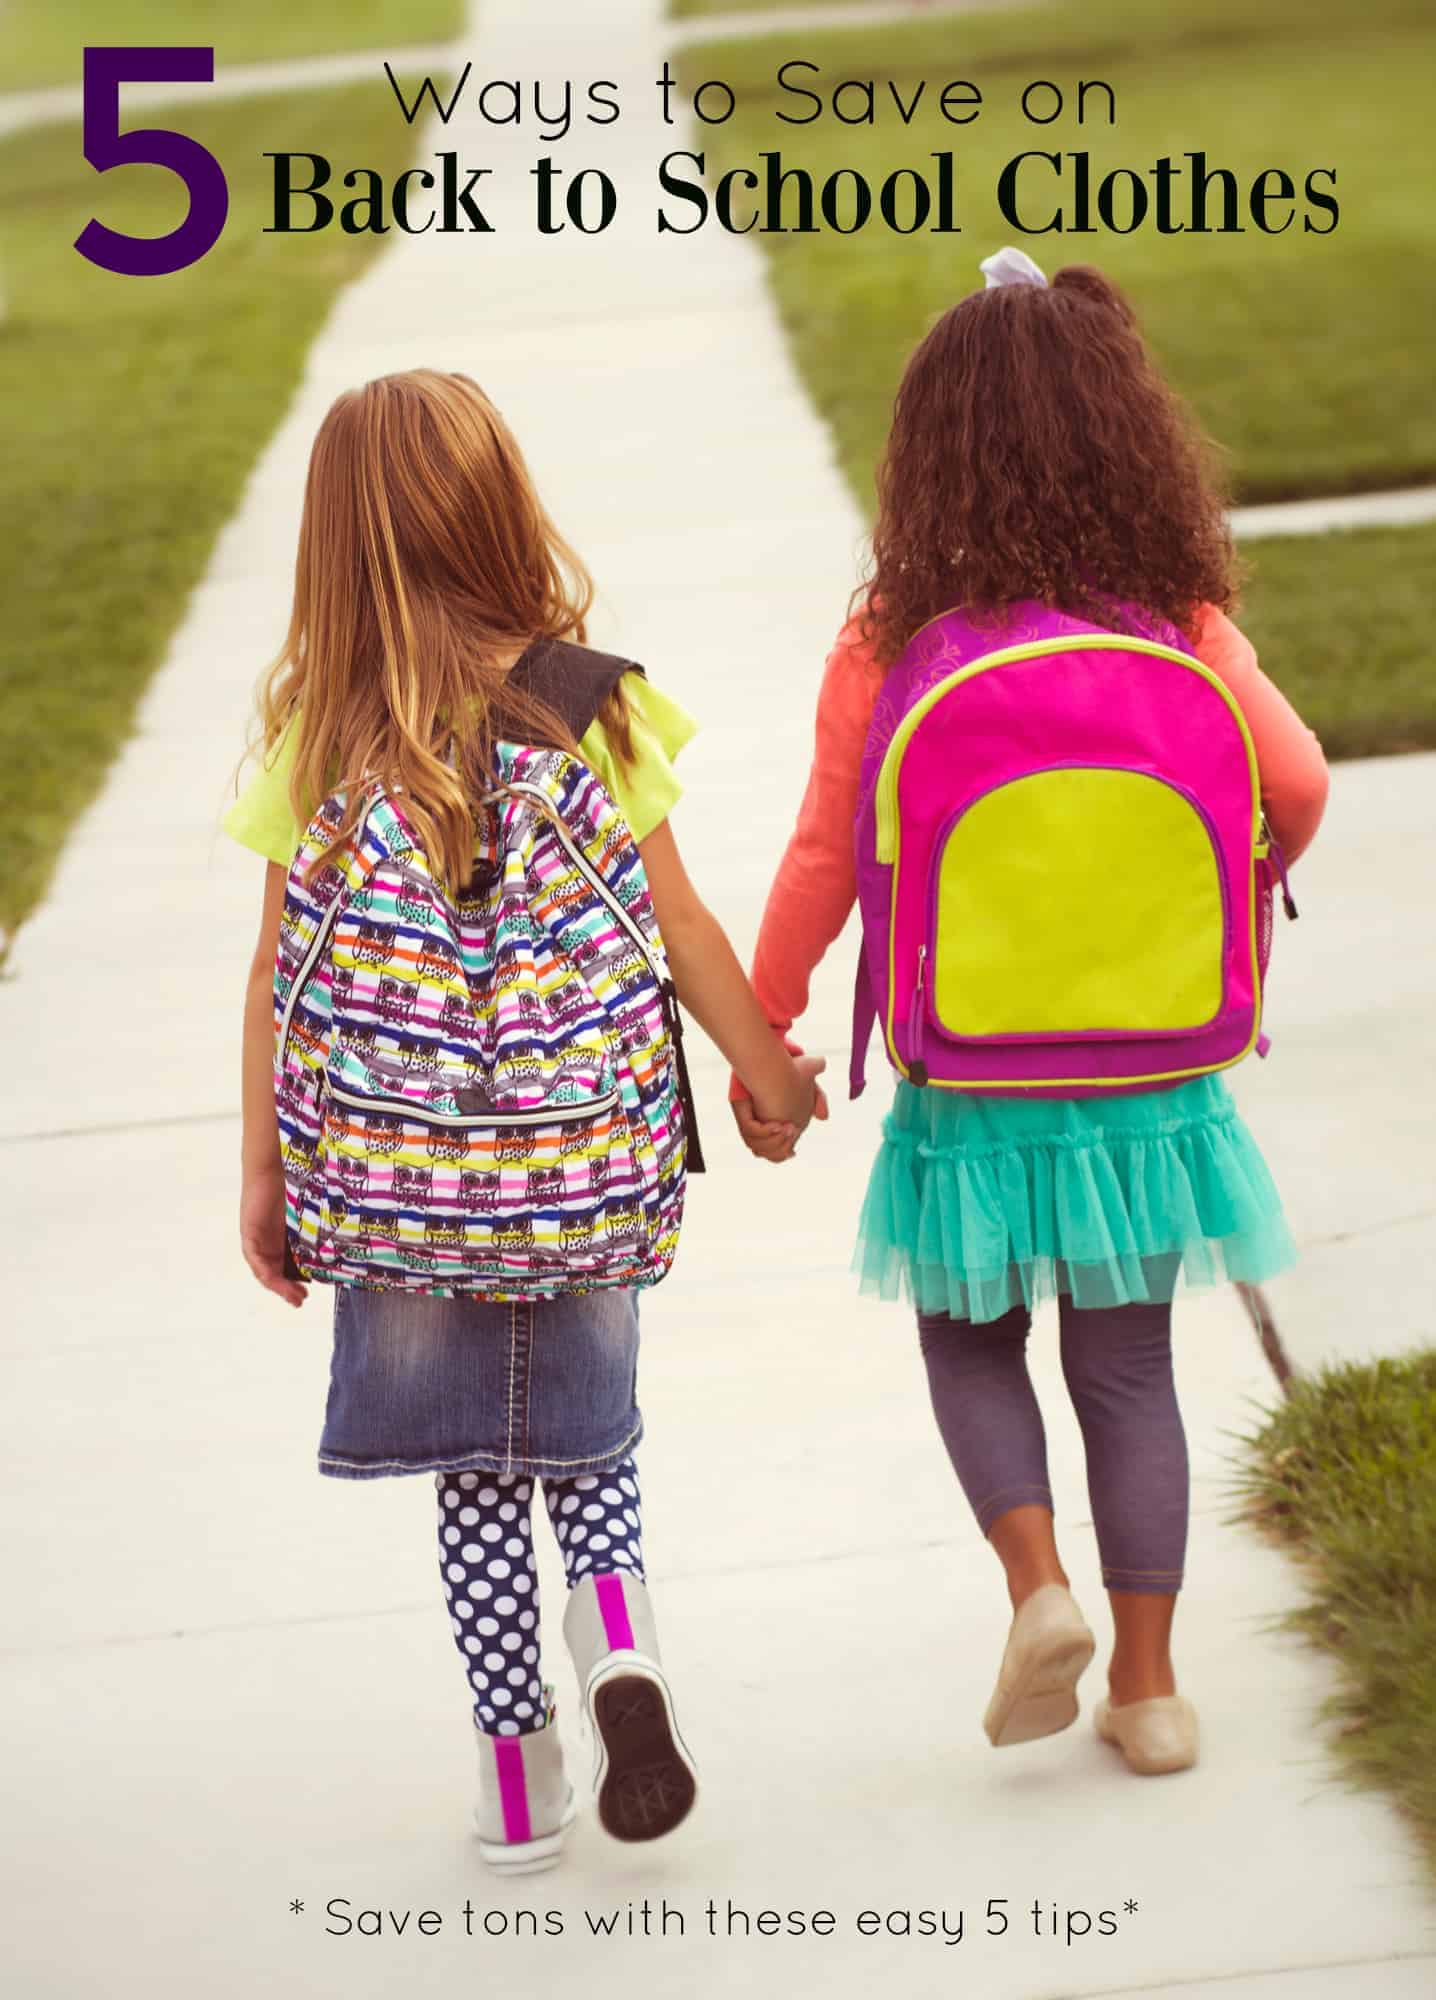 5 Ways to Save on Back to School Clothes